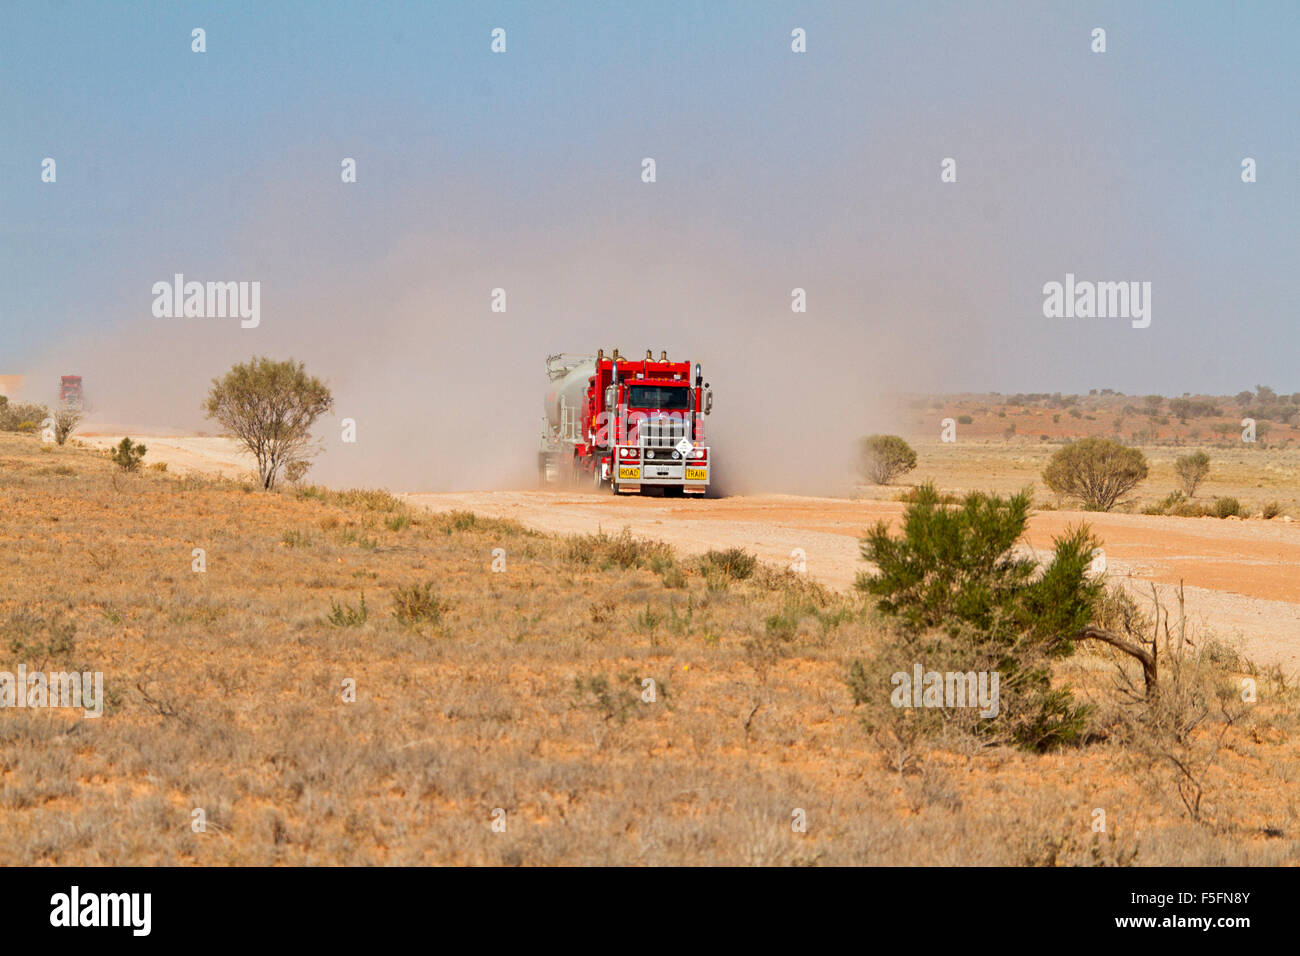 Road train, huge red semi-trailer / truck loaded with mining machinery ahead of cloud of dust on Australian outback road Stock Photo